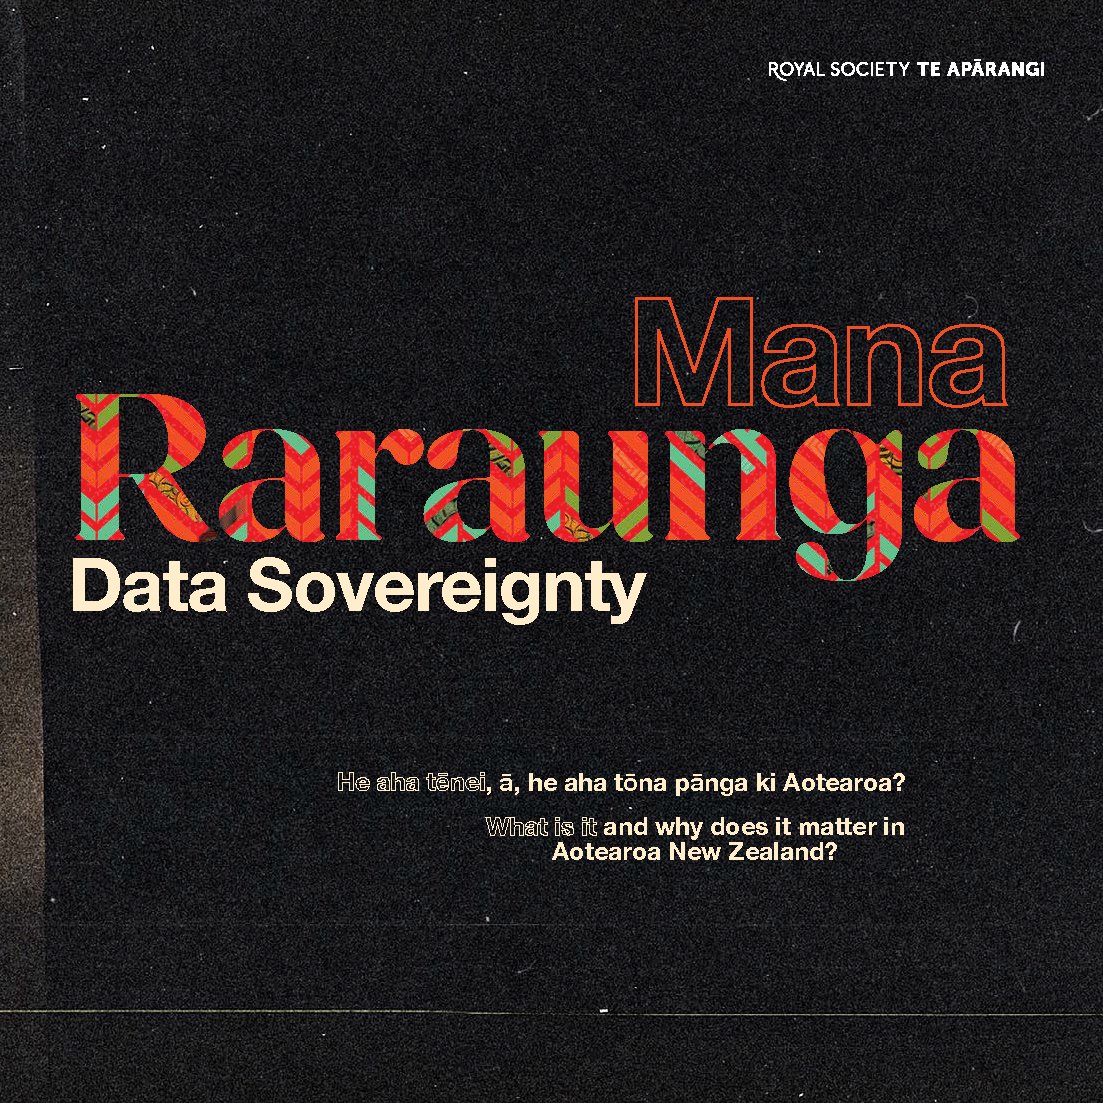 Our new Data Sovereignty report gives an overview of the concepts of data sovereignty, Indigenous data sovereignty, and Māori data sovereignty. These concepts are helping guide answers to complex questions about who owns, controls, and protects our data. bit.ly/3RKUpyC